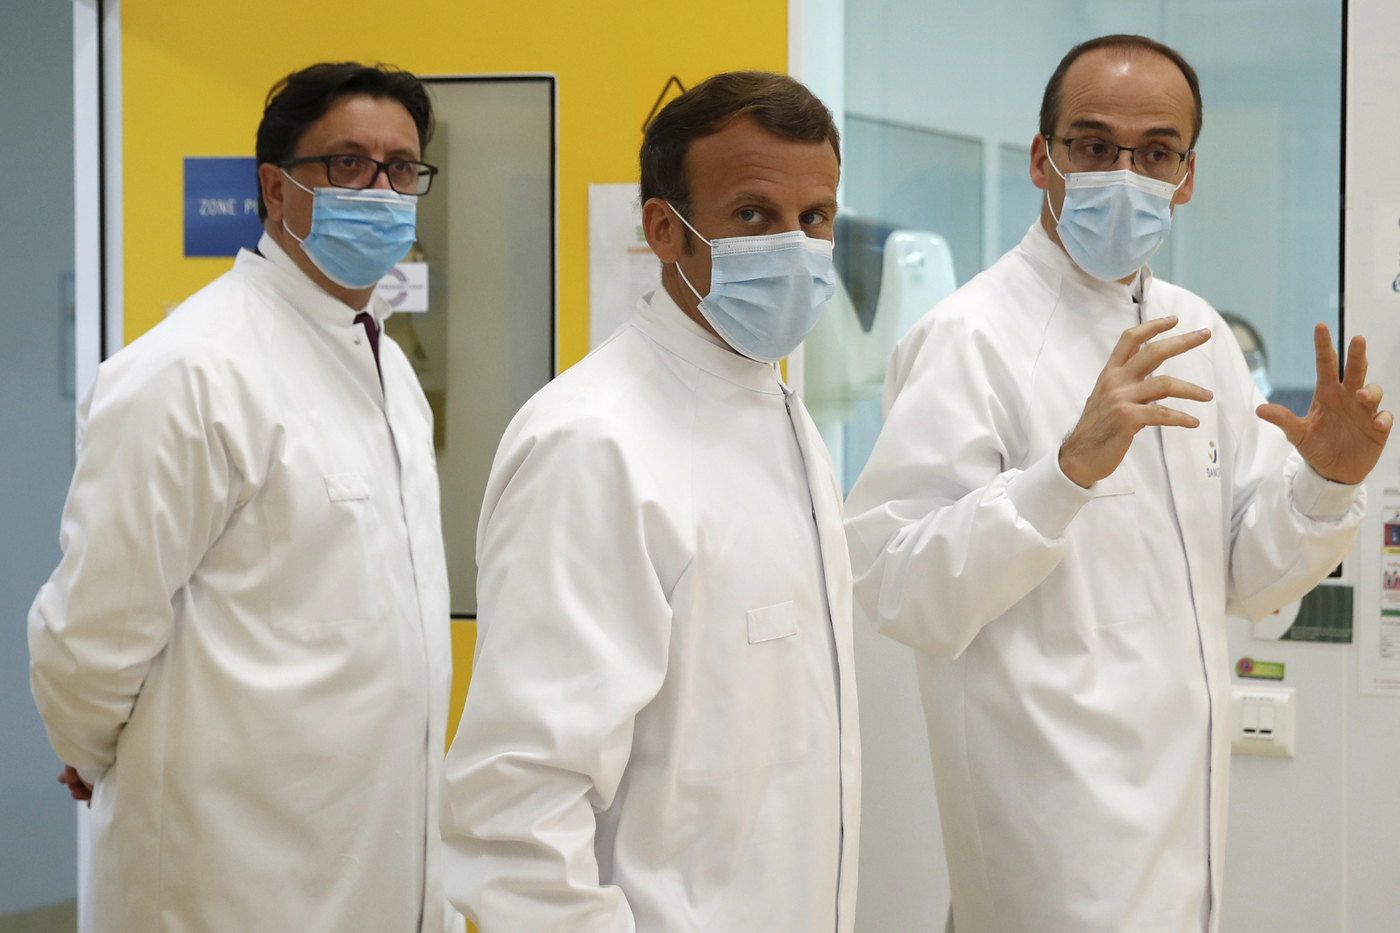 French President Emmanuel Macron, center, Thomas Triomphe, right, Executive Vice President of Sanofi Pasteur, and Paul Hudson, Chief Executive Officer of Sanofi, visits an industrial development laboratory at the French drugmaker's vaccine unit Sanofi Pasteur plant in Marcy-l'Etoile, near Lyon, central France, Tuesday, June 16, 2020. The visit comes after rival pharmaceutical company AstraZeneca this weekend announced a deal to supply 400 million vaccine doses to EU countries, including France. (Gonzalo Fuentes/Pool via AP)